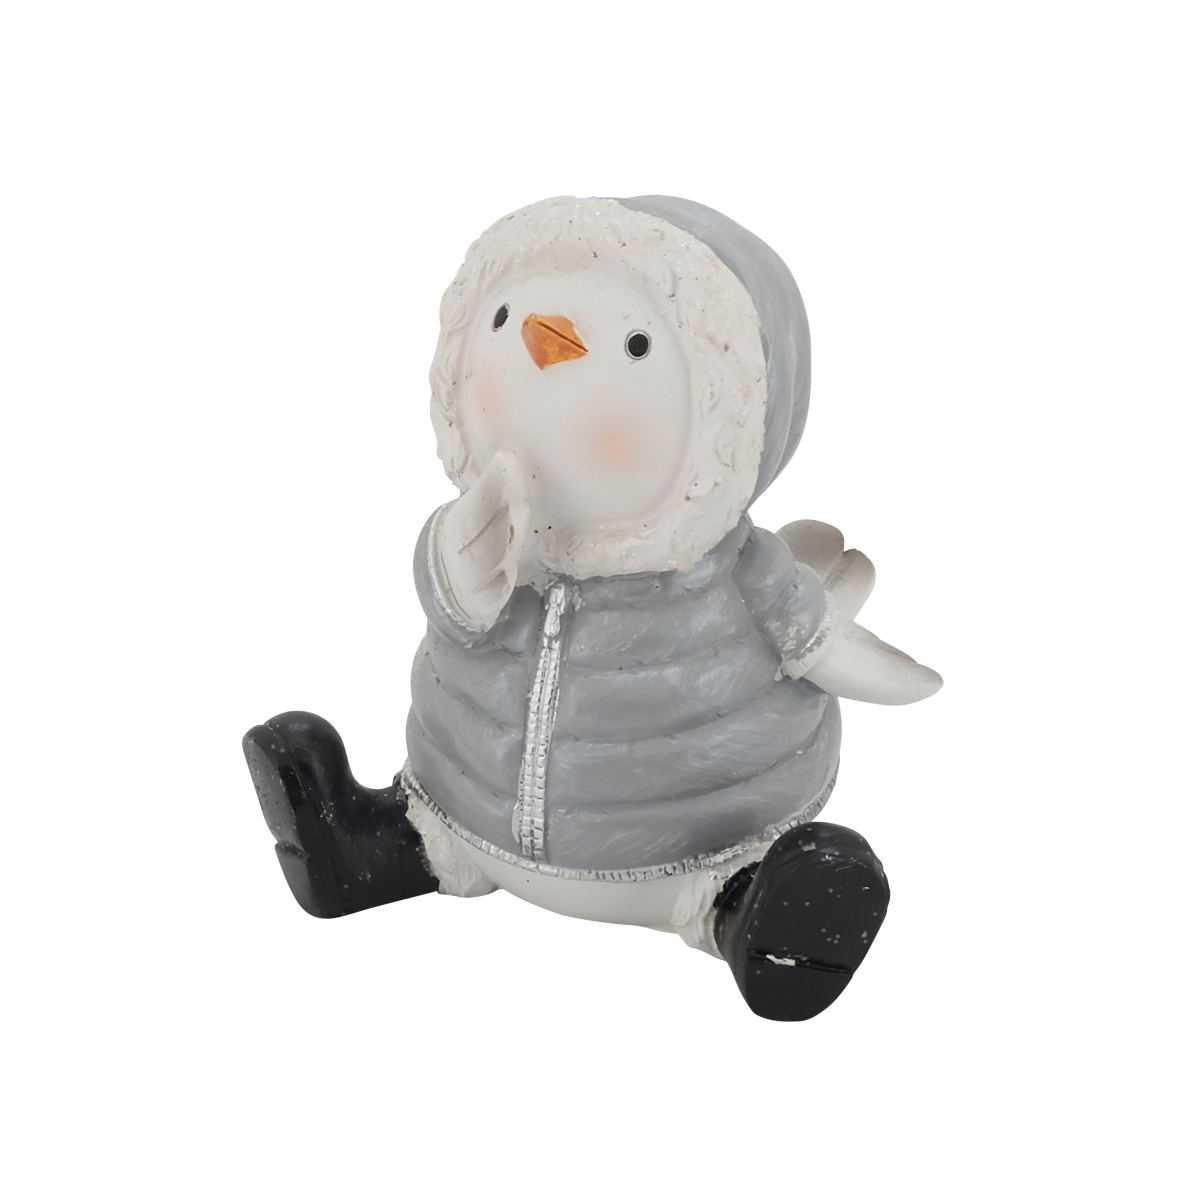 Picture of Saro Lifestyle XD290.M 4 in. Snow Jacket Figurine with Bird, Multi Color